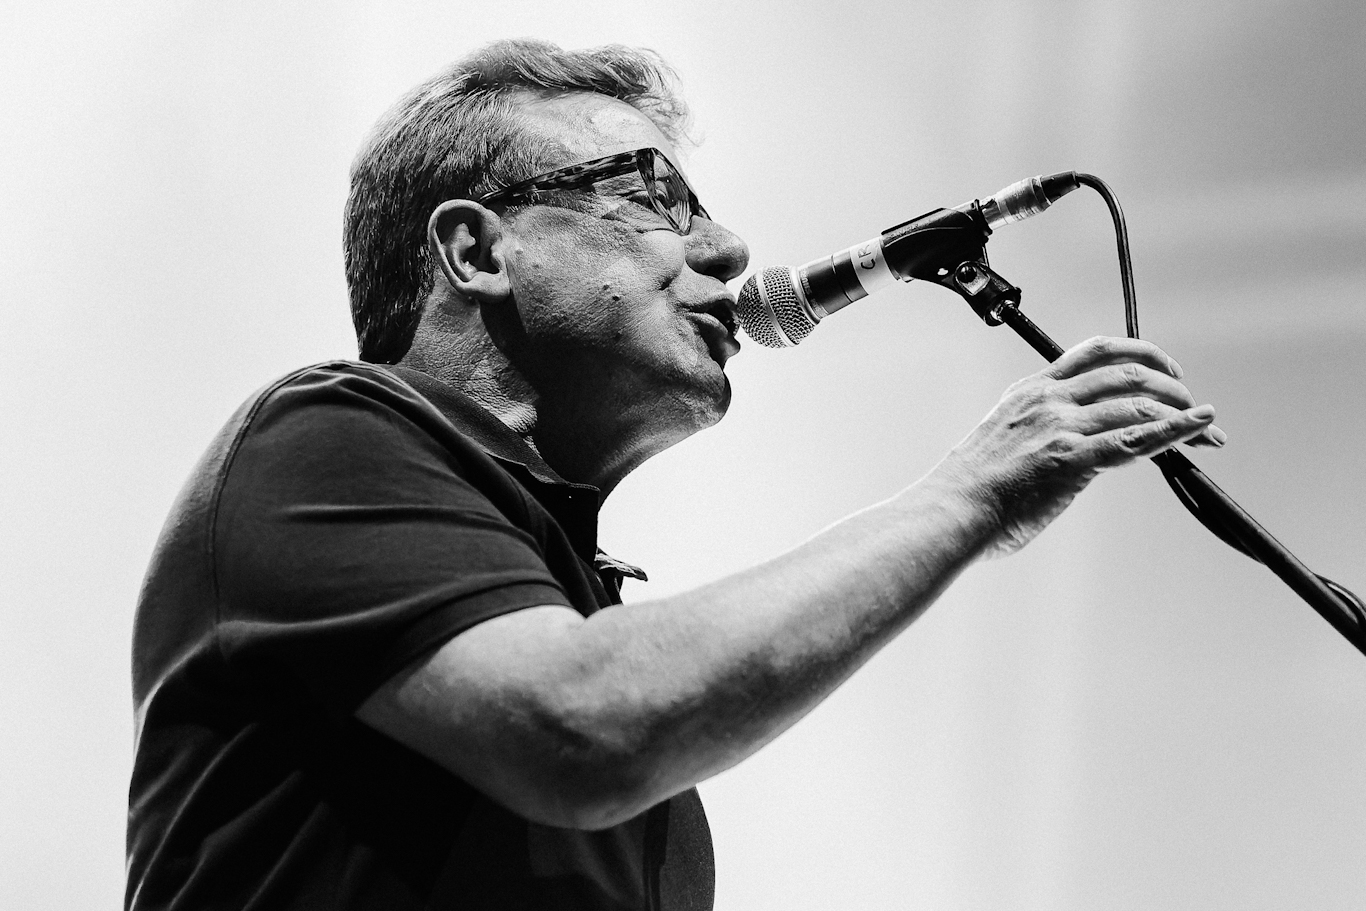 LIVE REVIEW: The Proclaimers - at O2 City Hall, Newcastle upon Tyne